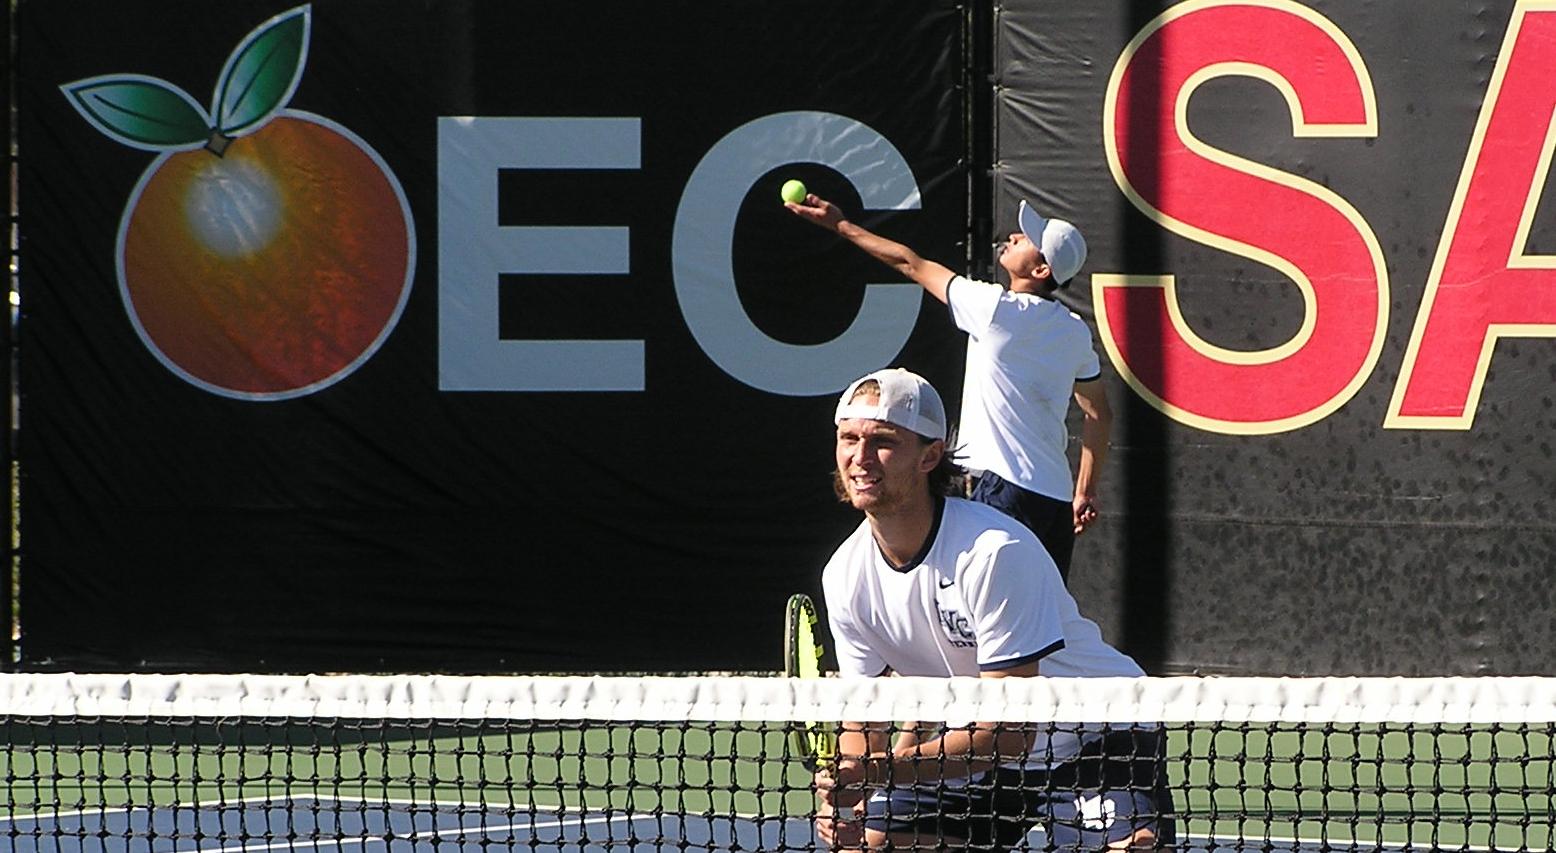 Men's tennis team stays perfect in conference play